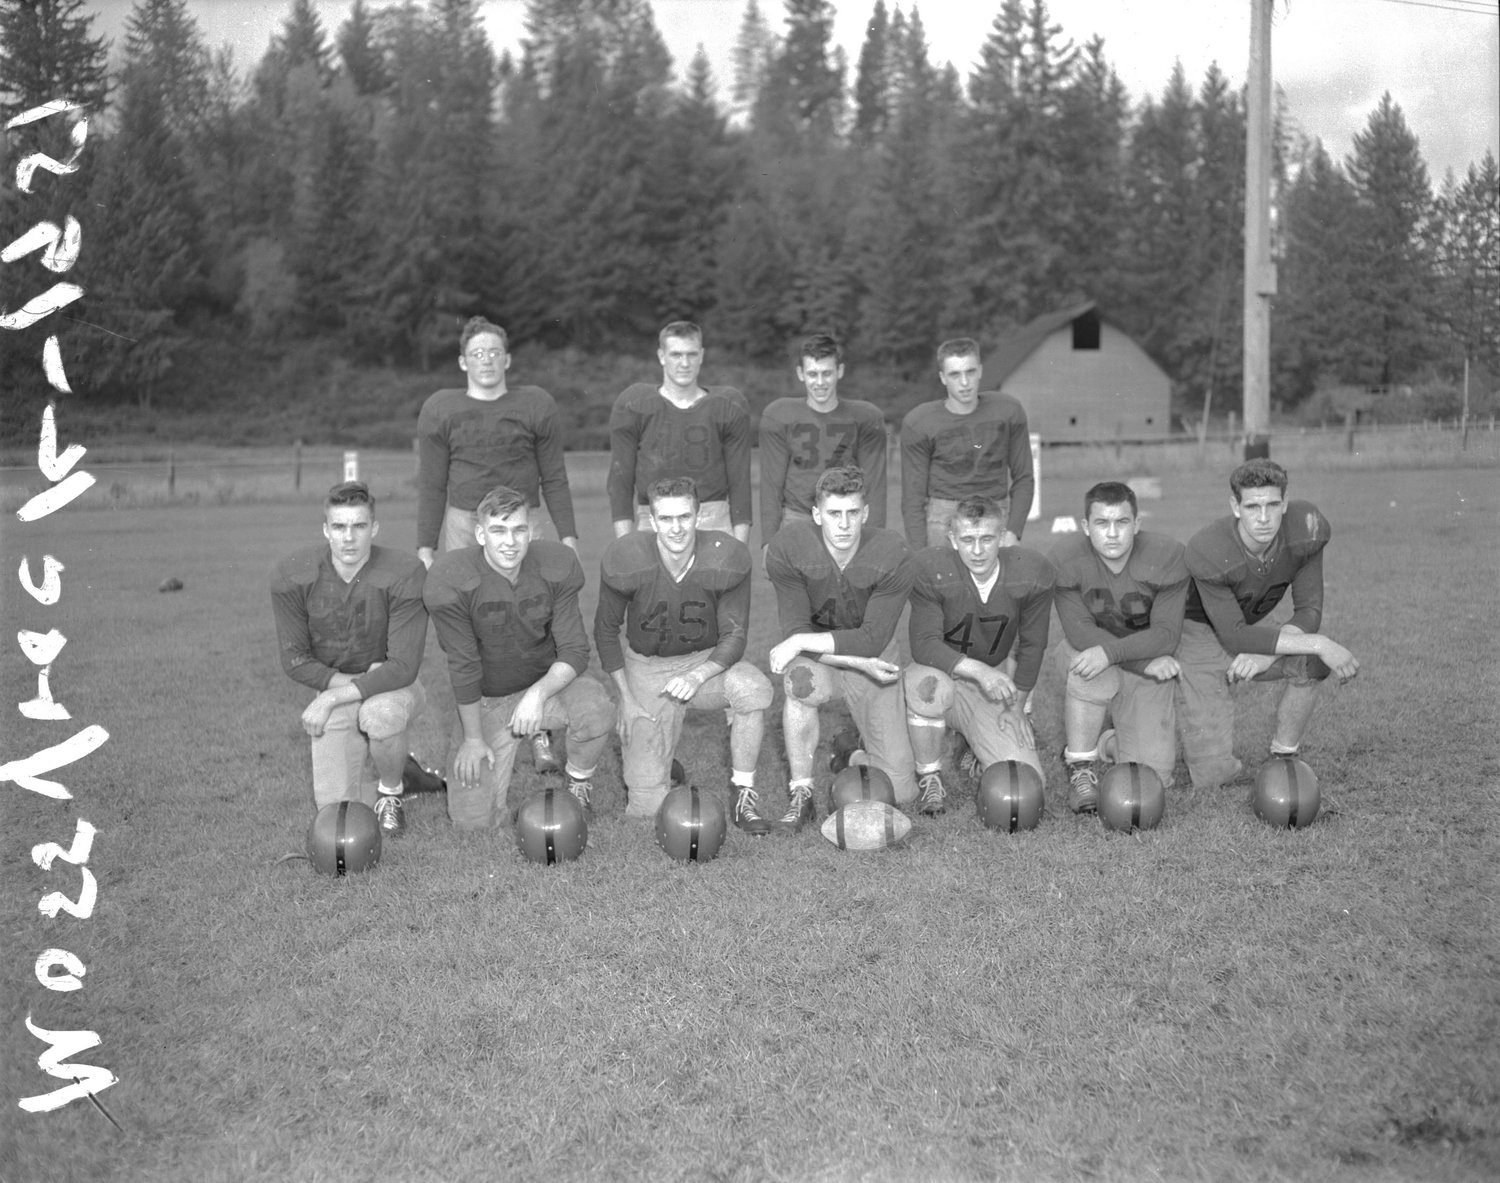 The 1951 Mossyrock  High School football team is pictured here.